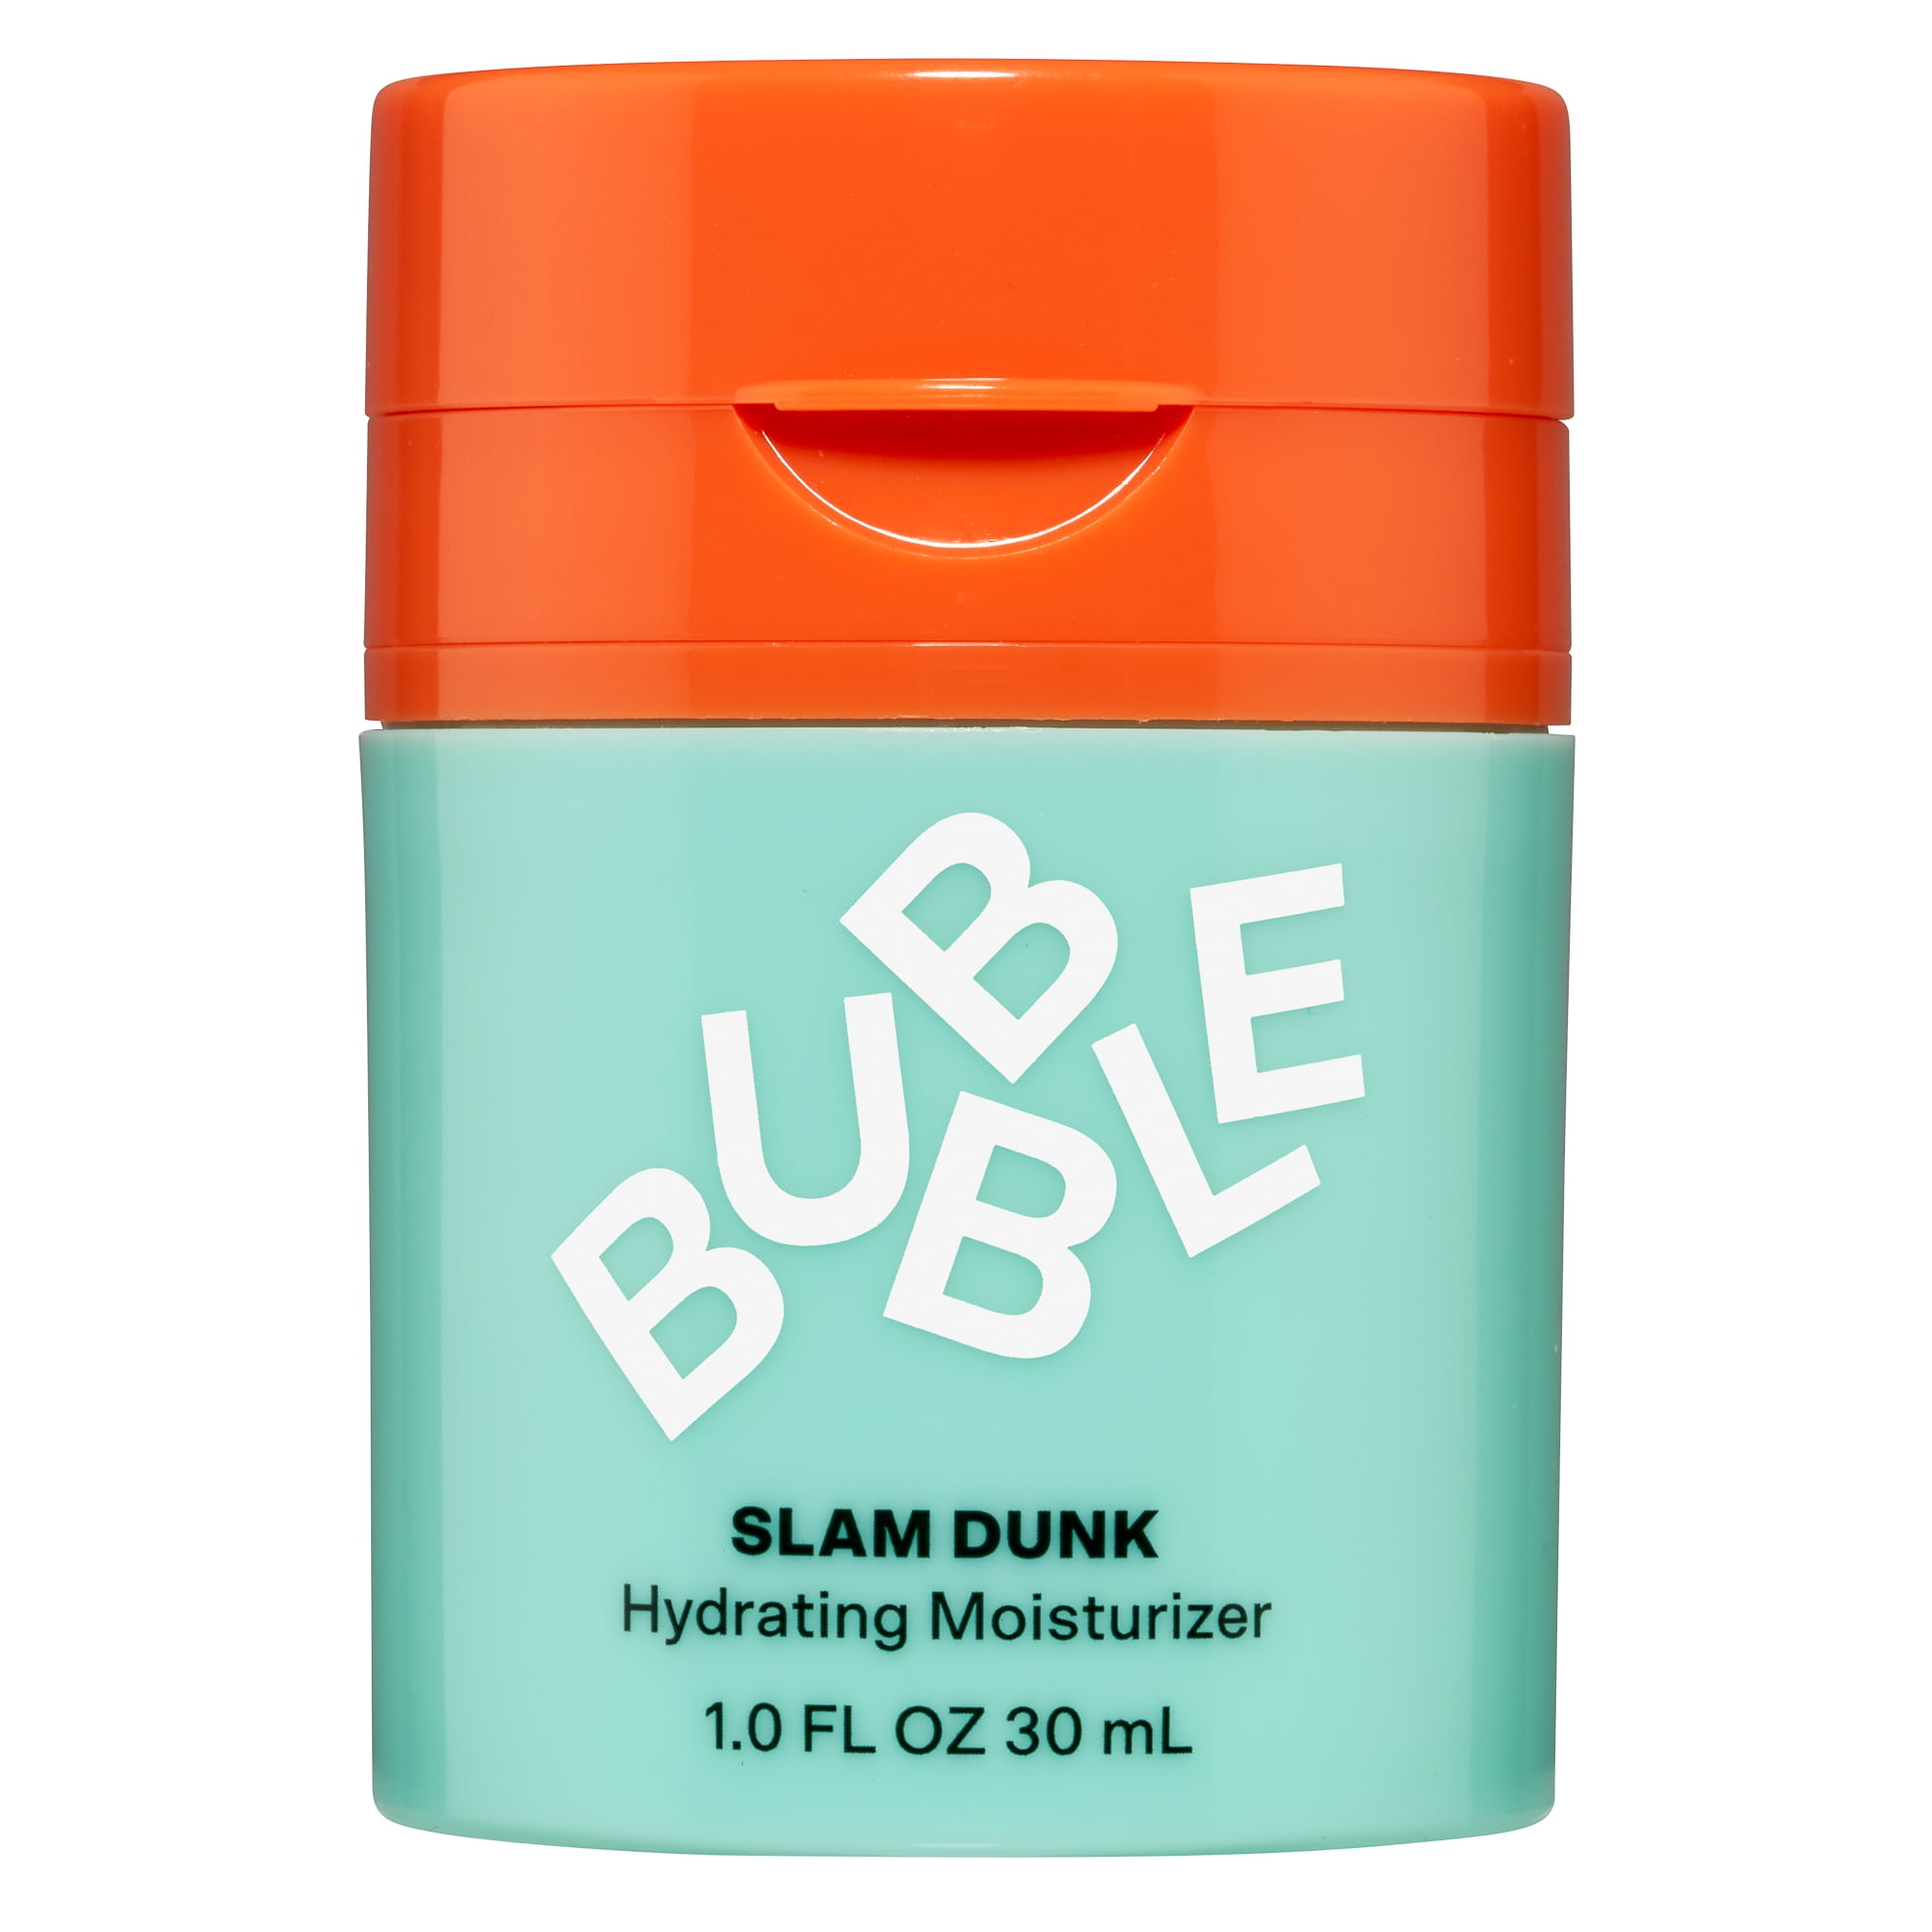 Bubble Skincare Slam Dunk Hydrating Face Moisturizer, for Normal to Dry Skin, 1.0 fl oz / 30ml